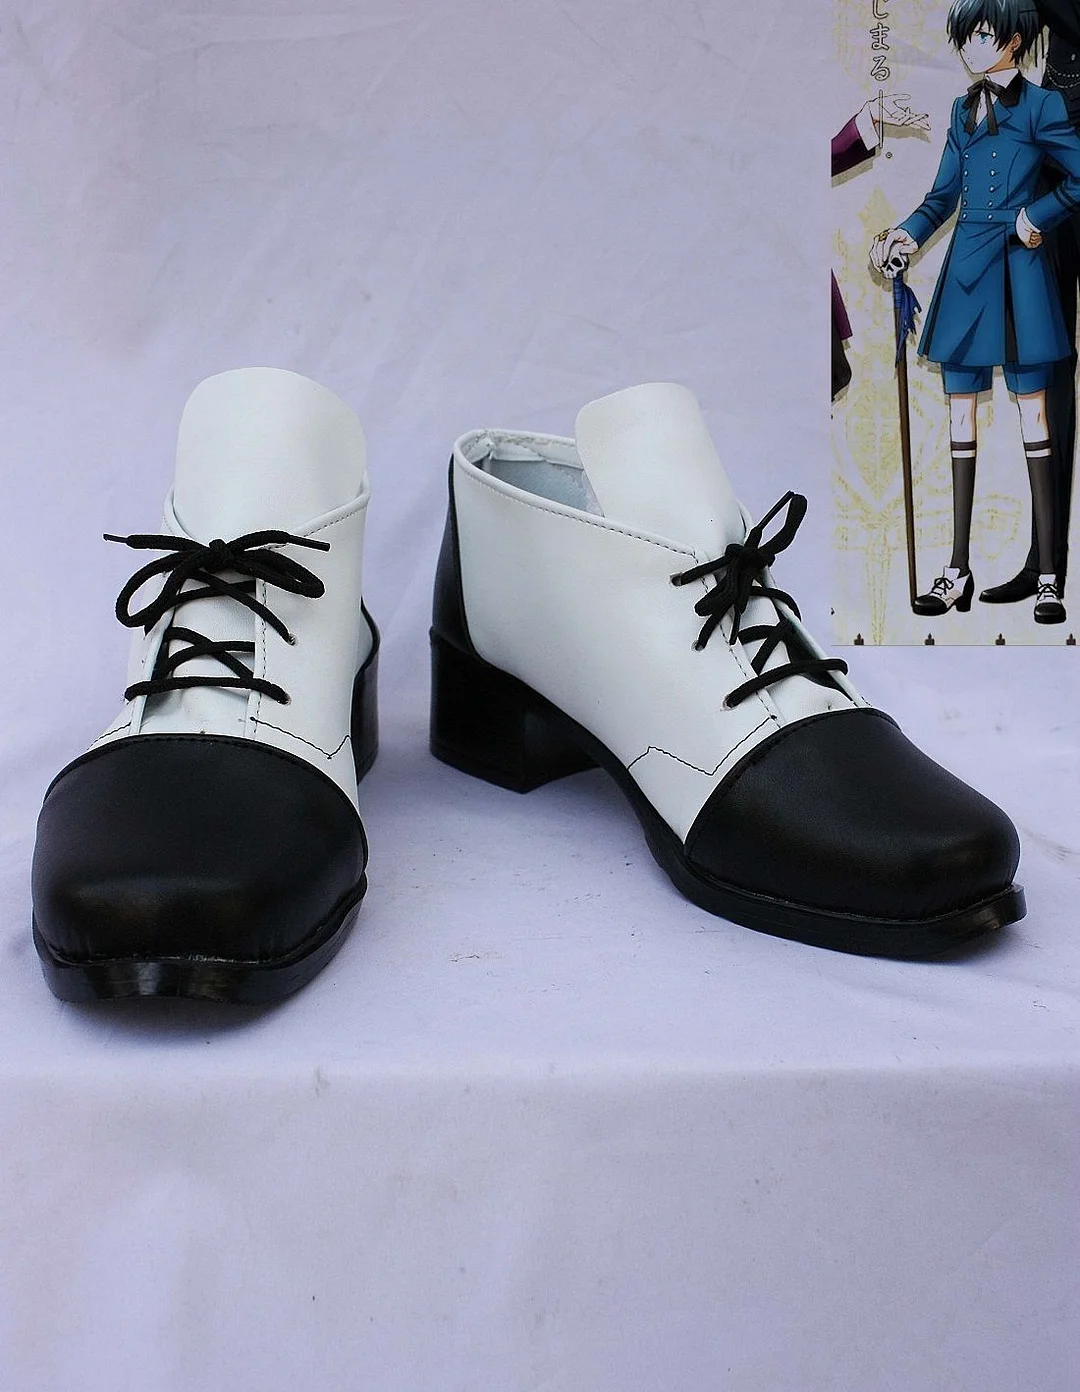 Black Butler Ciel Phantomhive Cosplay Shoes Boots